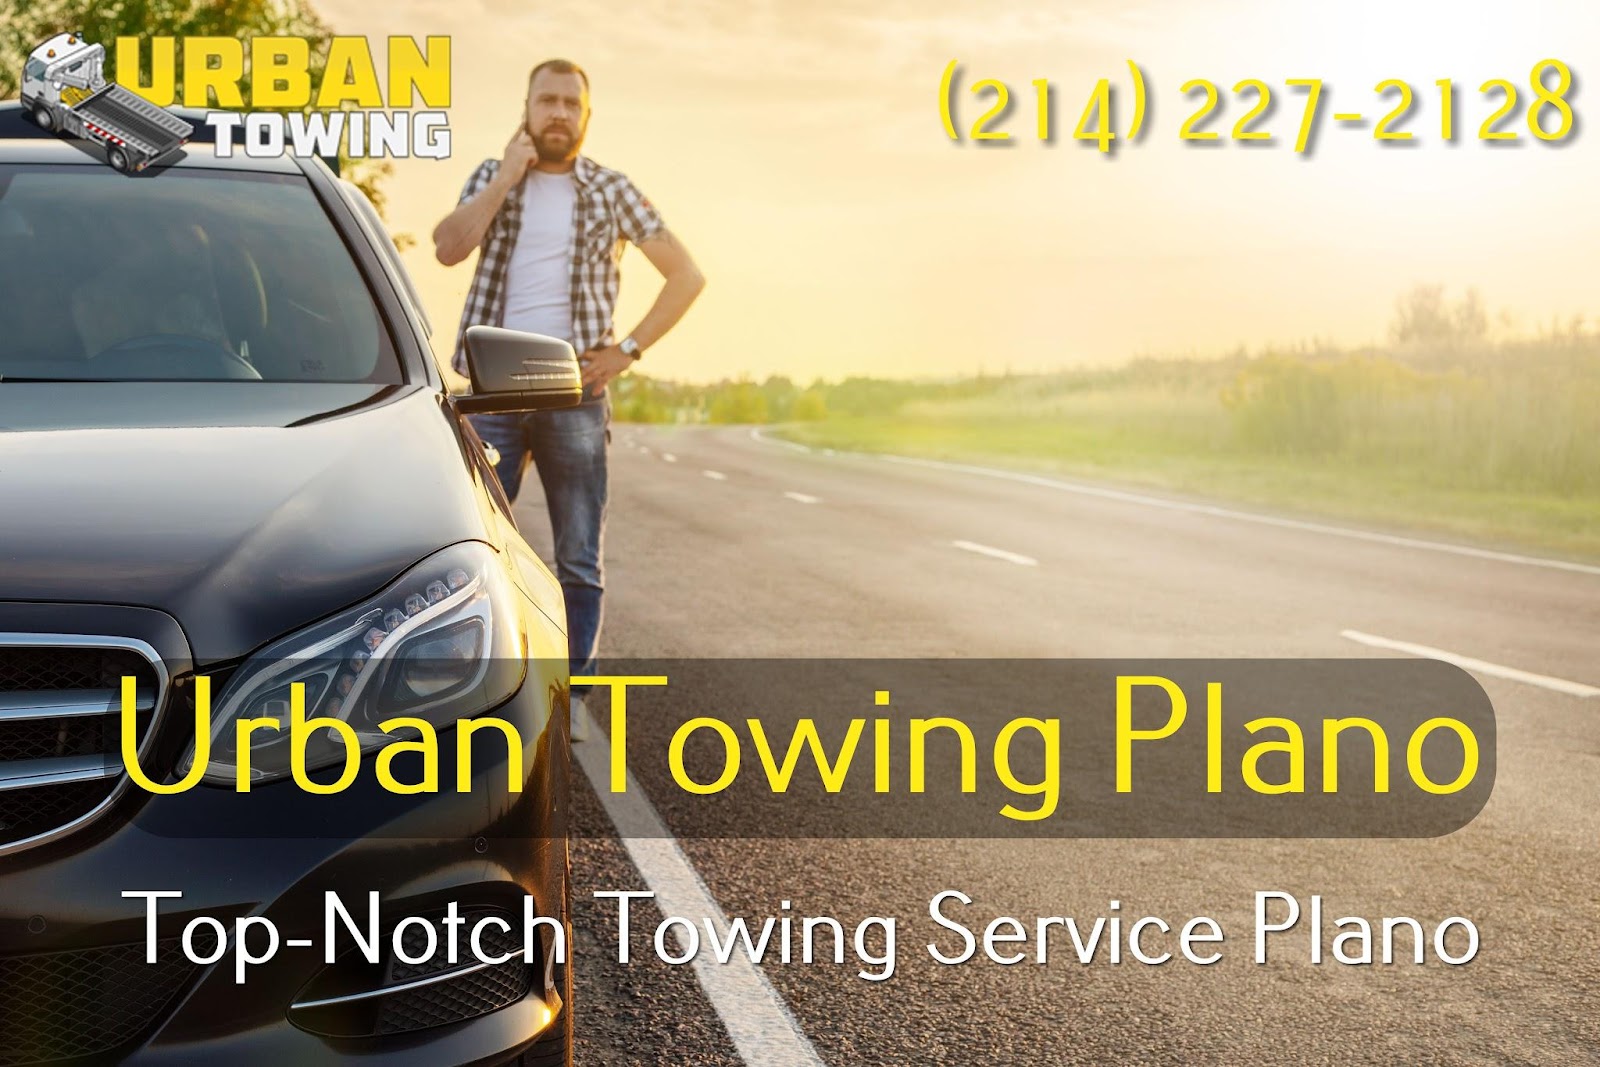 With a consistent record of prompt, efficient, and affordable towing and roadside assistance services, the company has become the go-to name for people of the Plano community and surrounding areas.